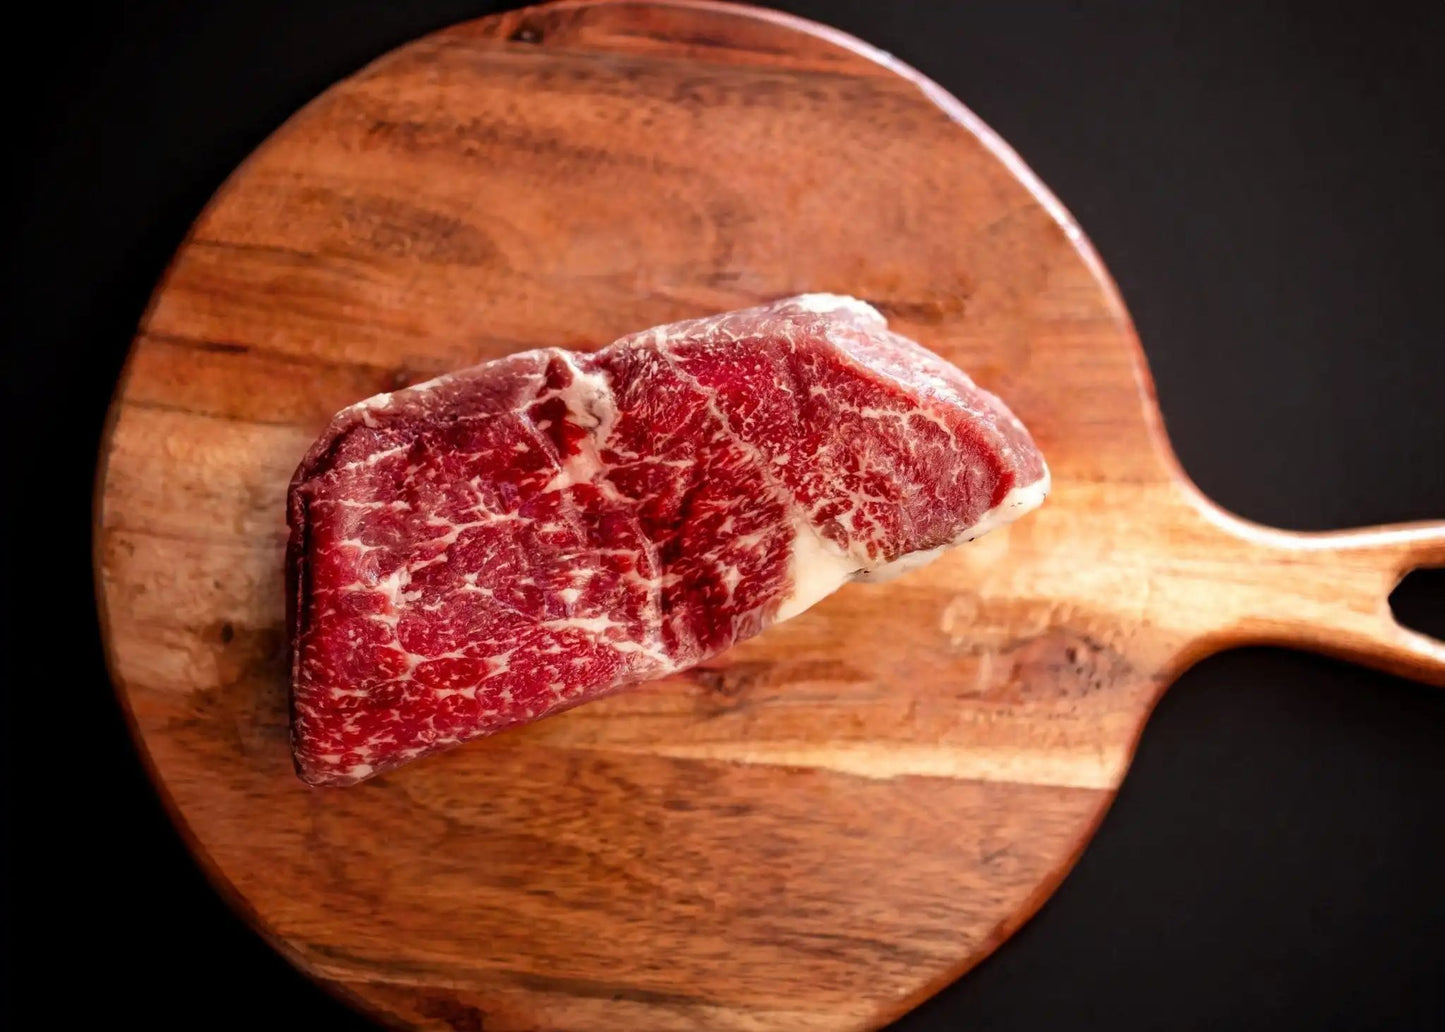 100% All-Natural Grass-Fed Pasture-Raised Wagyu Bottom Round SteakExperience the unforgettable flavor and tenderness of Hufeisen Ranch's 100% All-Natural Grass-Fed Pasture-Raised Wagyu Bottom Round Steak. This cut is rich in marbli100%The Hufeisen-Ranch (WYO Wagyu)